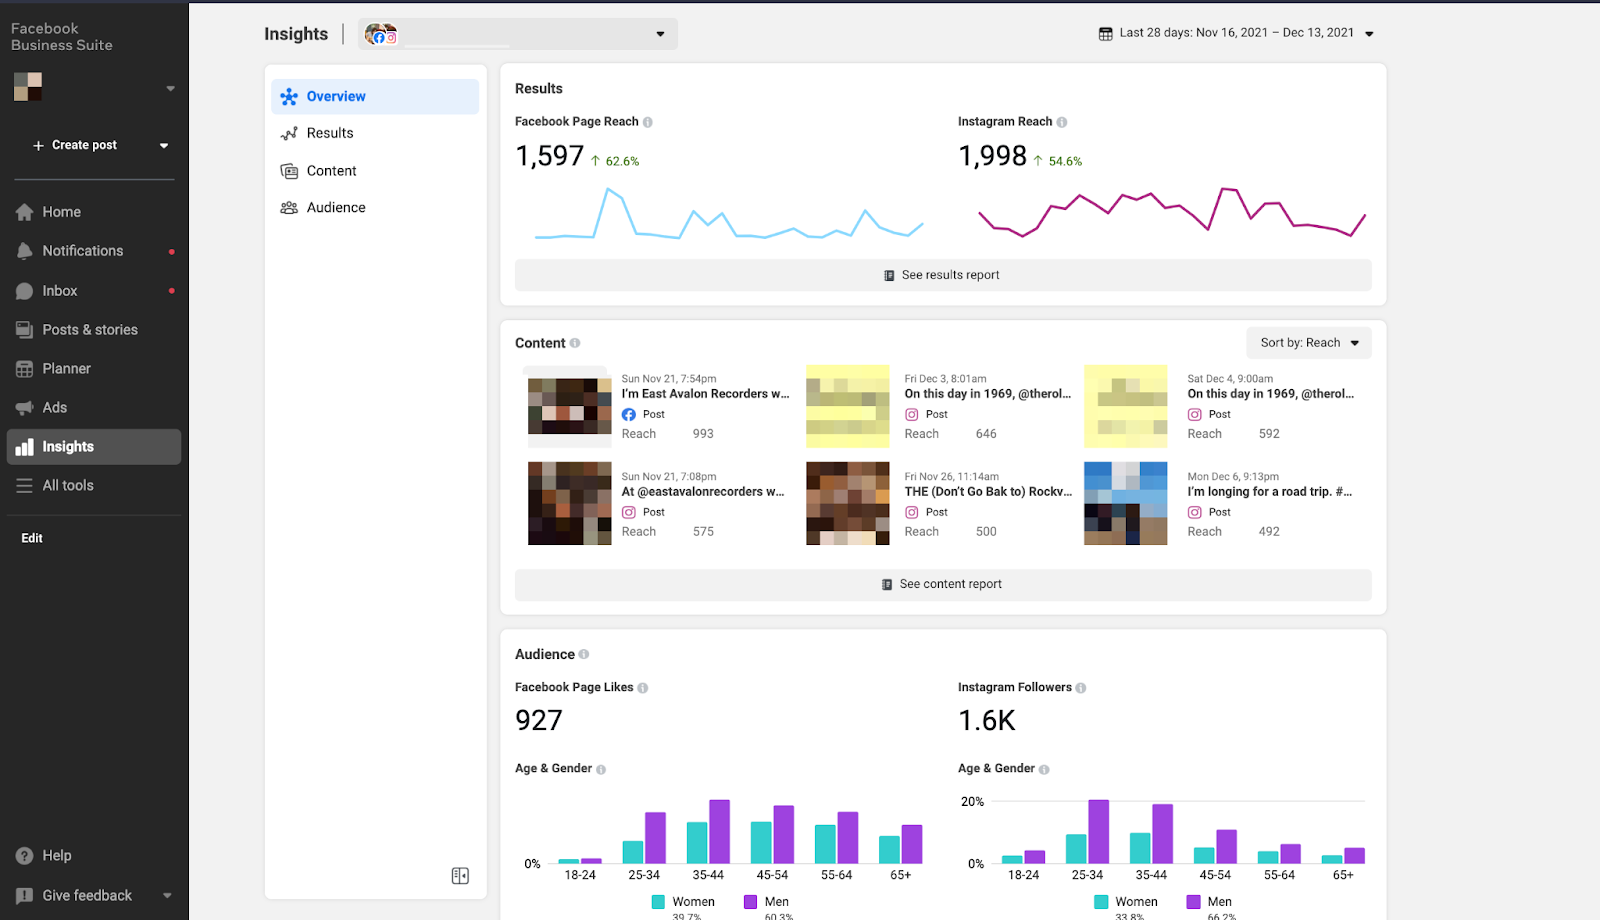 Facebook Business Suite Insights